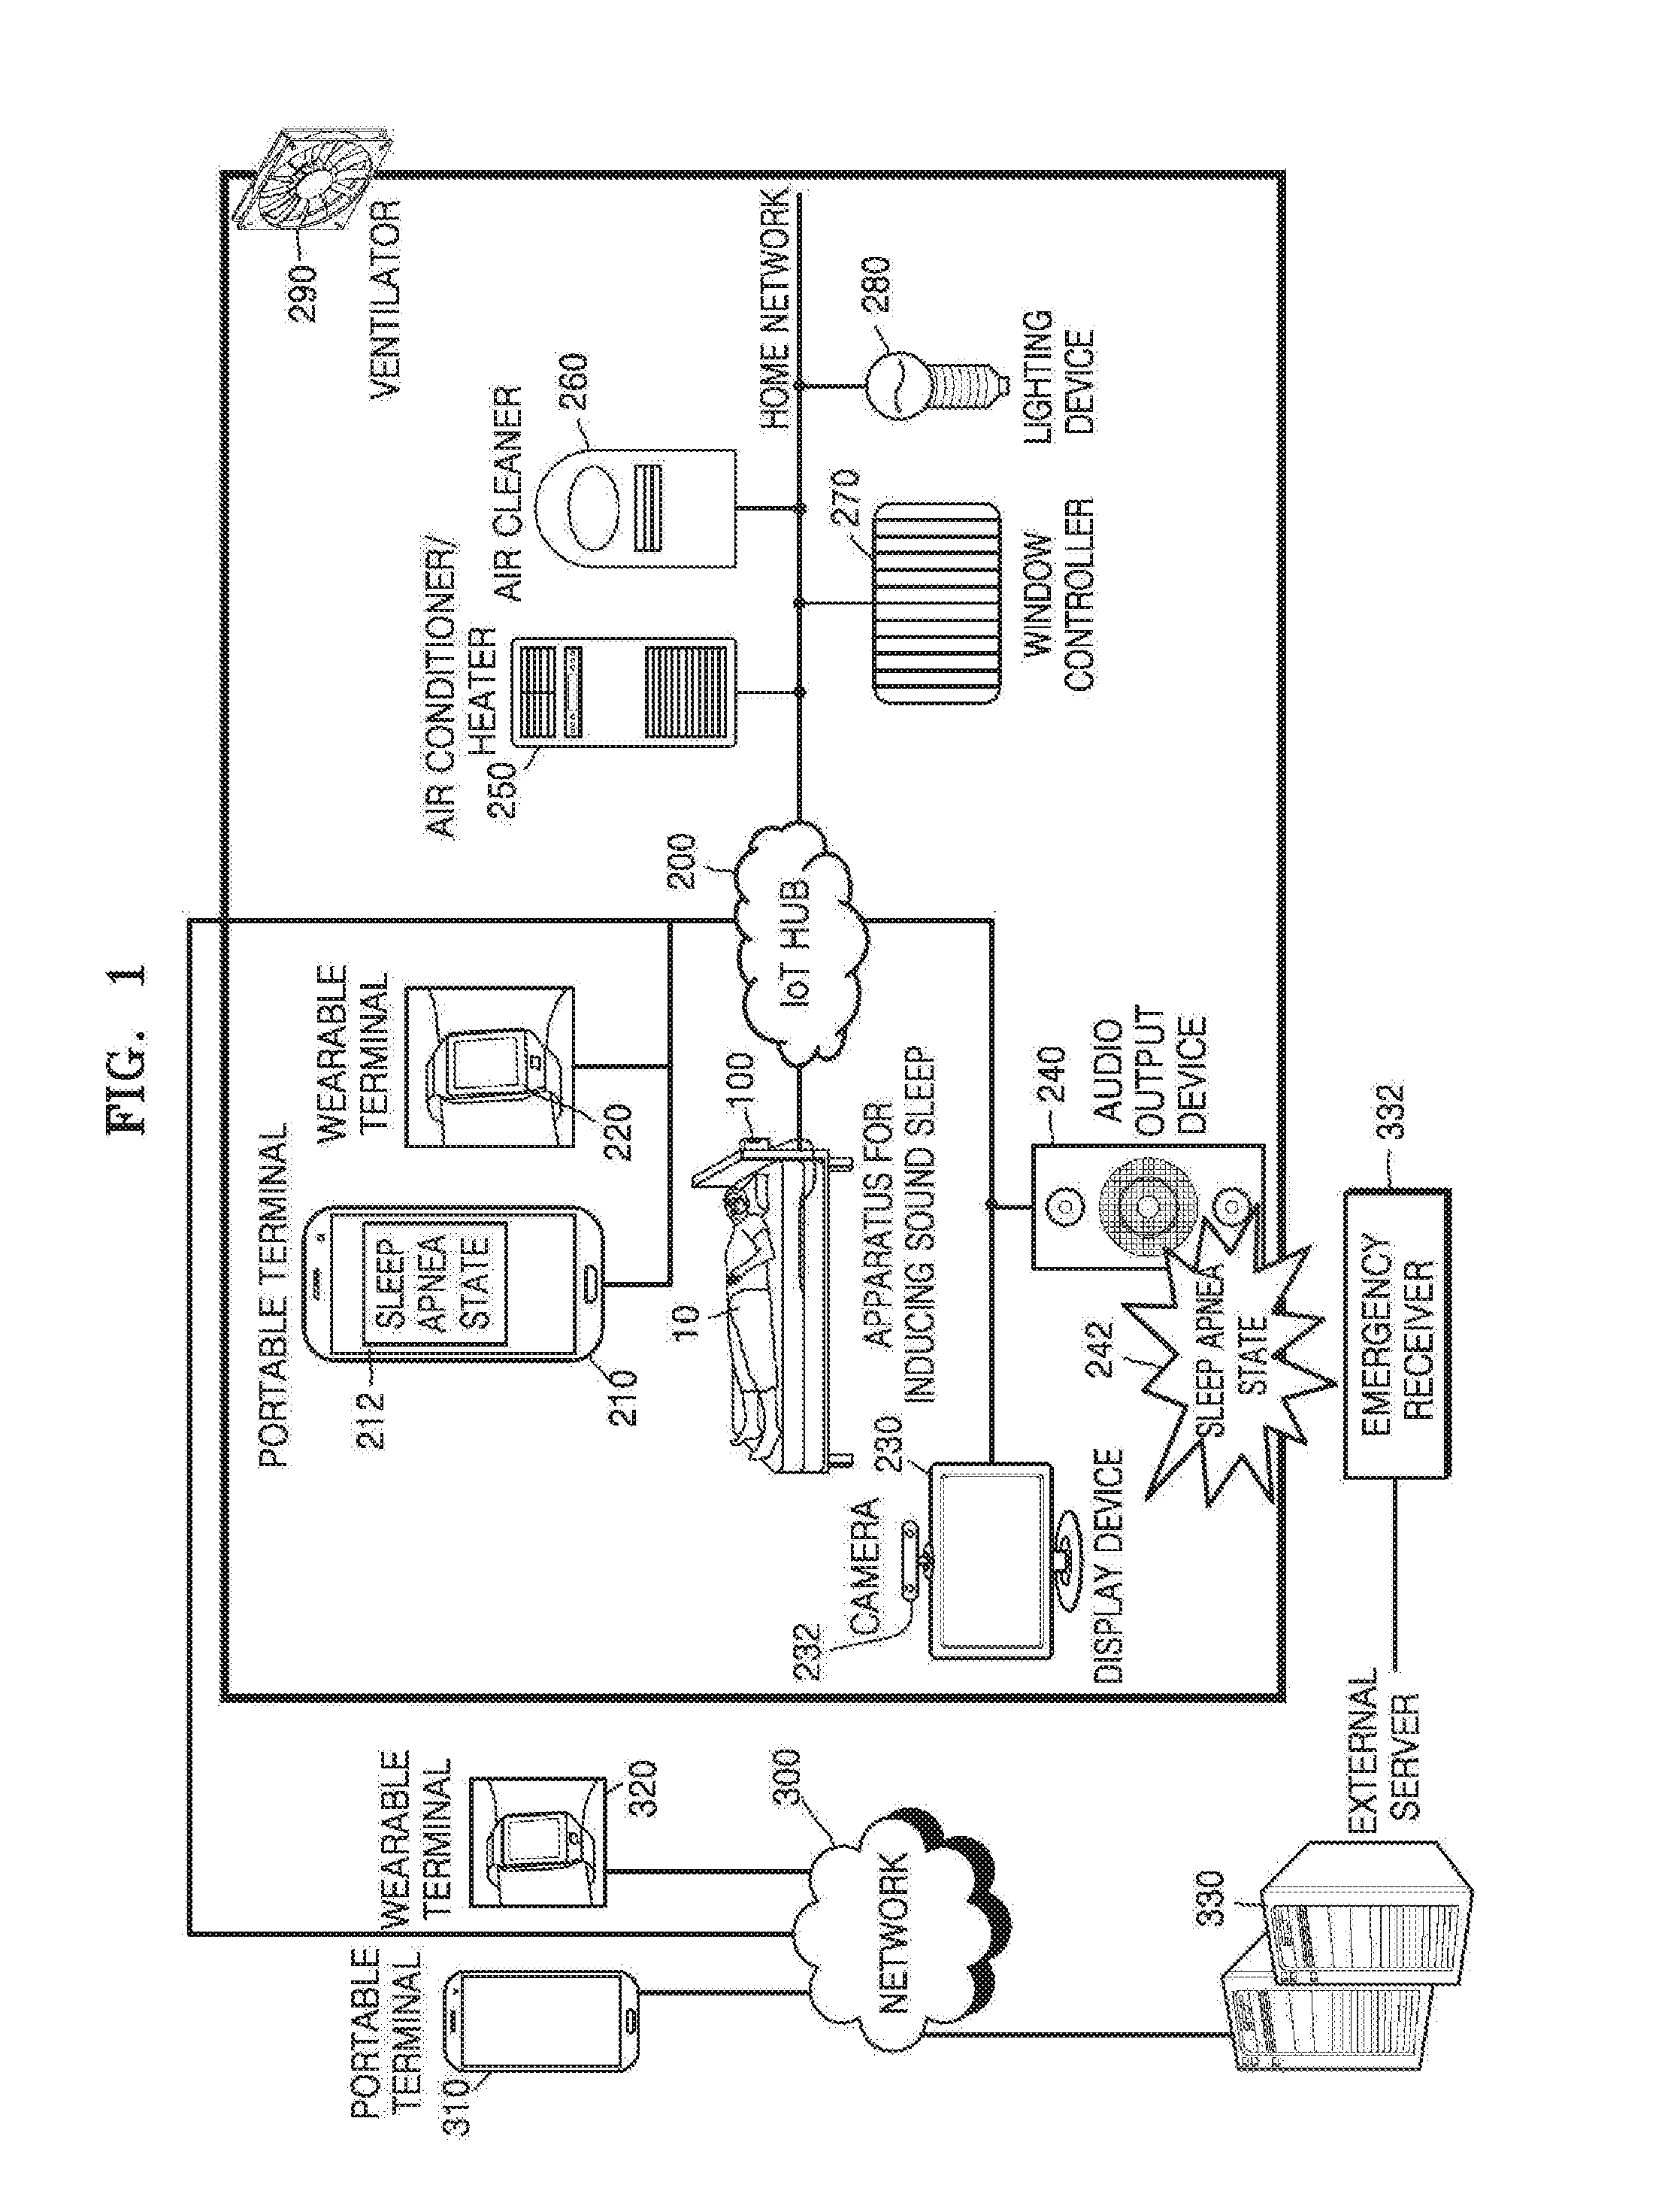 Method and apparatus for improving and monitoring sleep